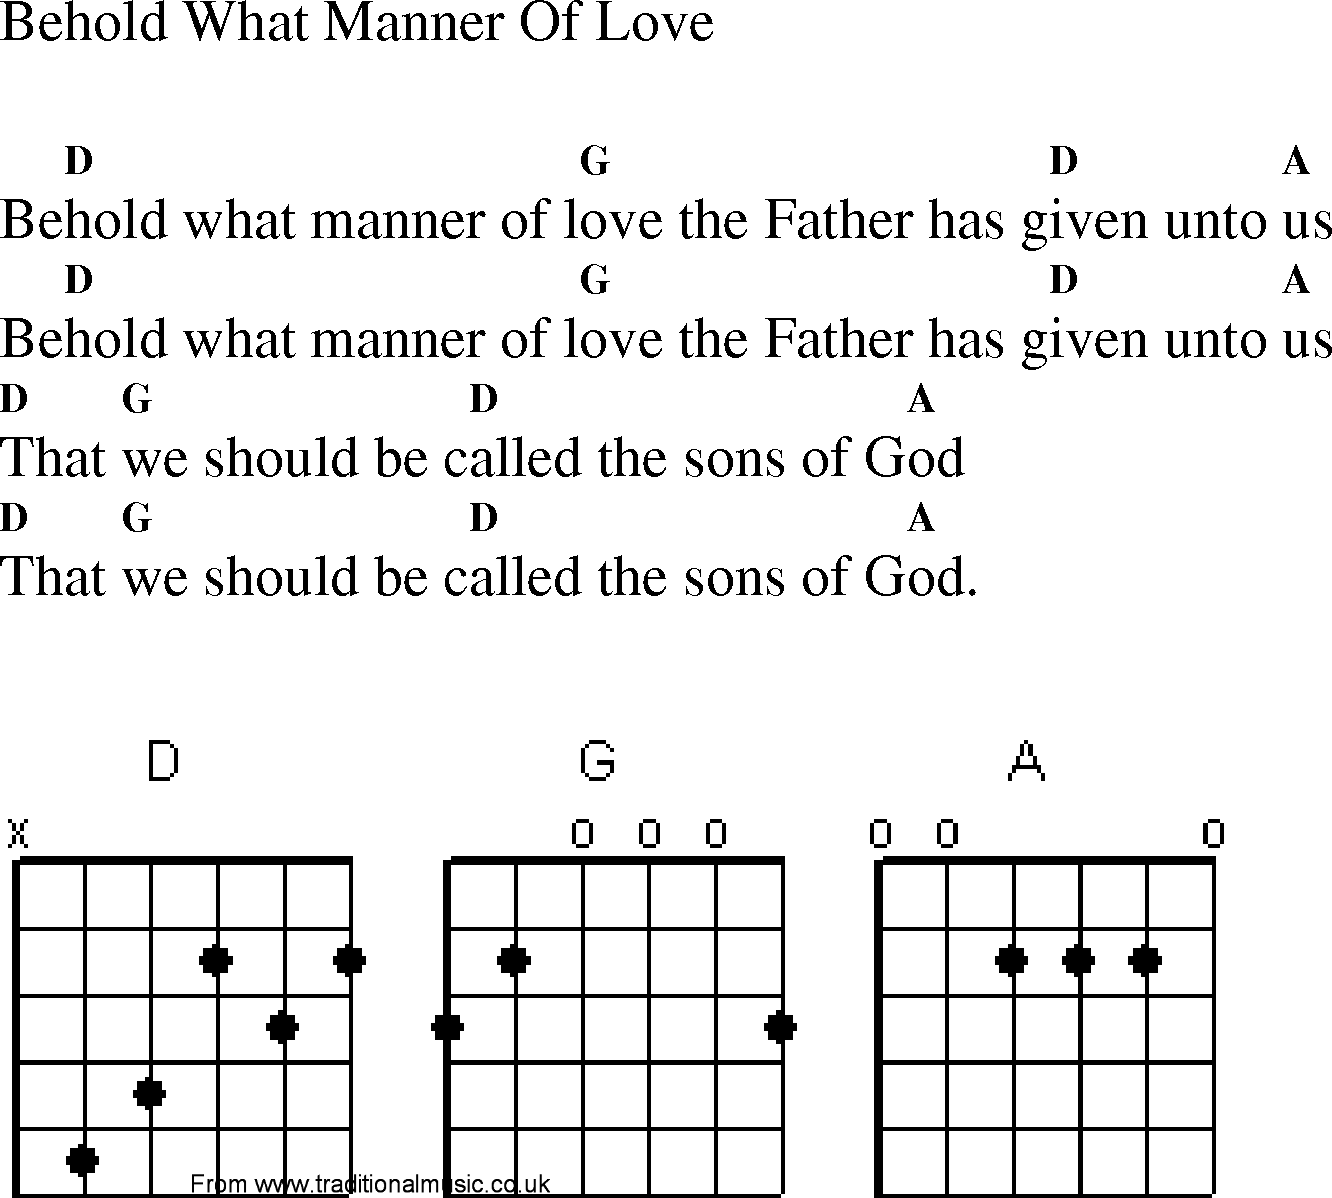 Gospel Song: behold_what_manner_of_love, lyrics and chords.